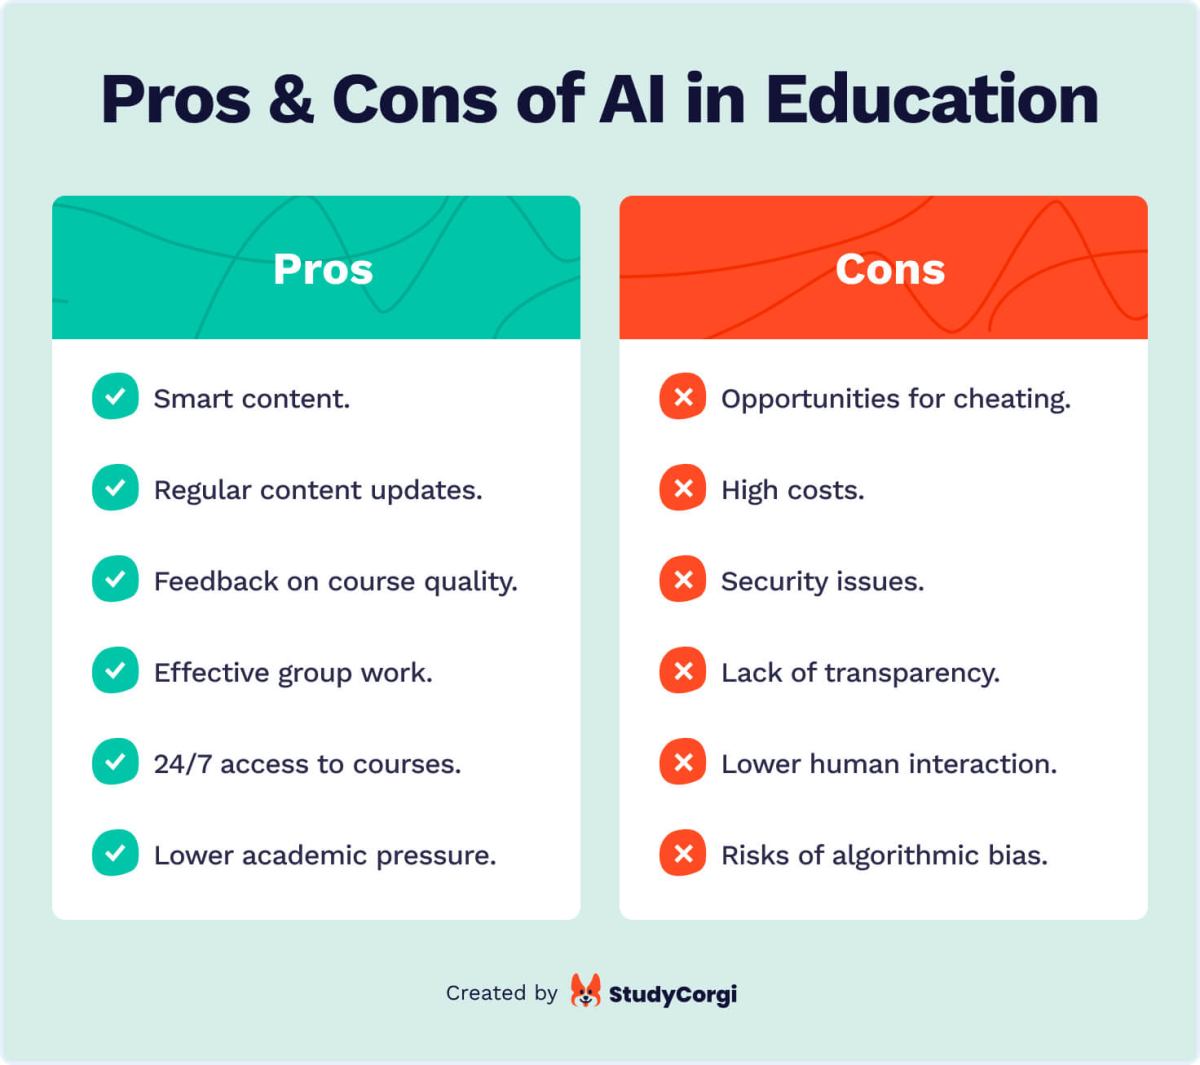 This image lists pros and cons of using AI in education.